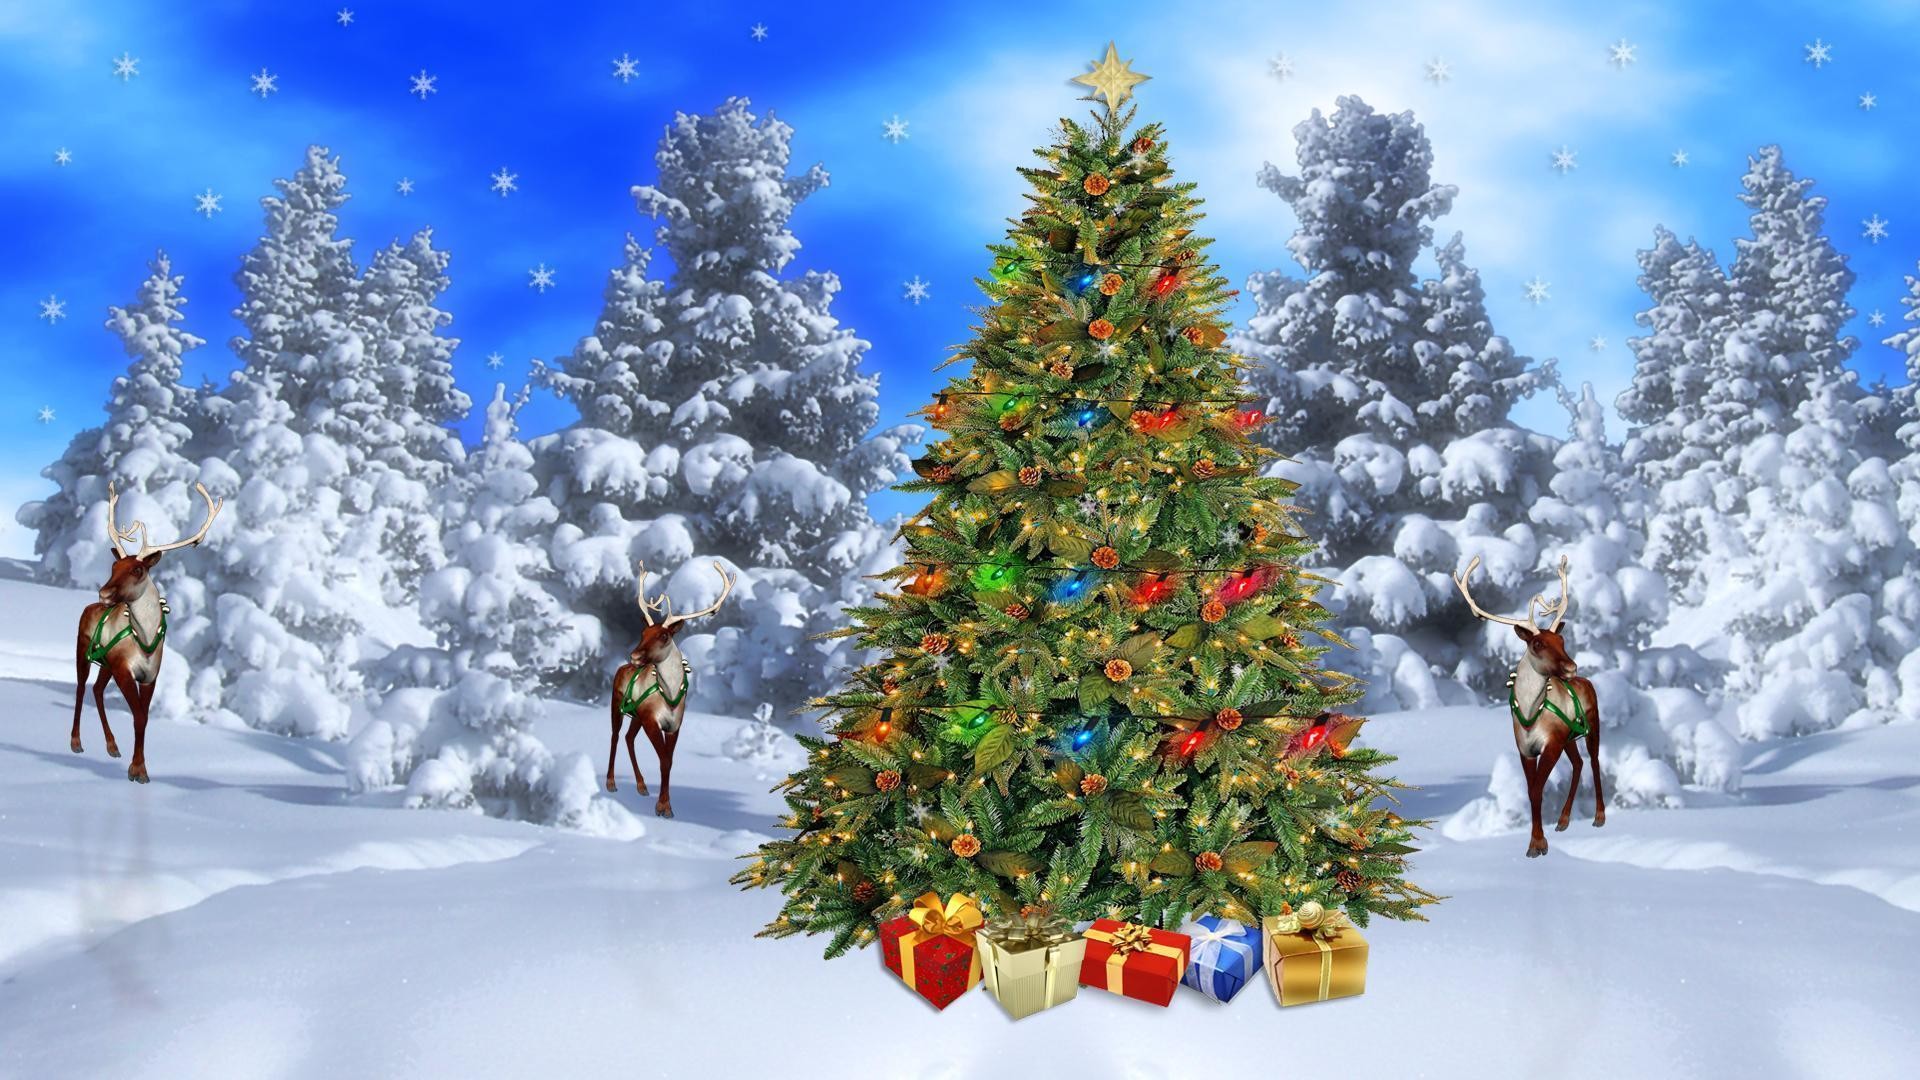 1920x1080 Wallpapers For > Hd Christmas Scenery Wallpaper